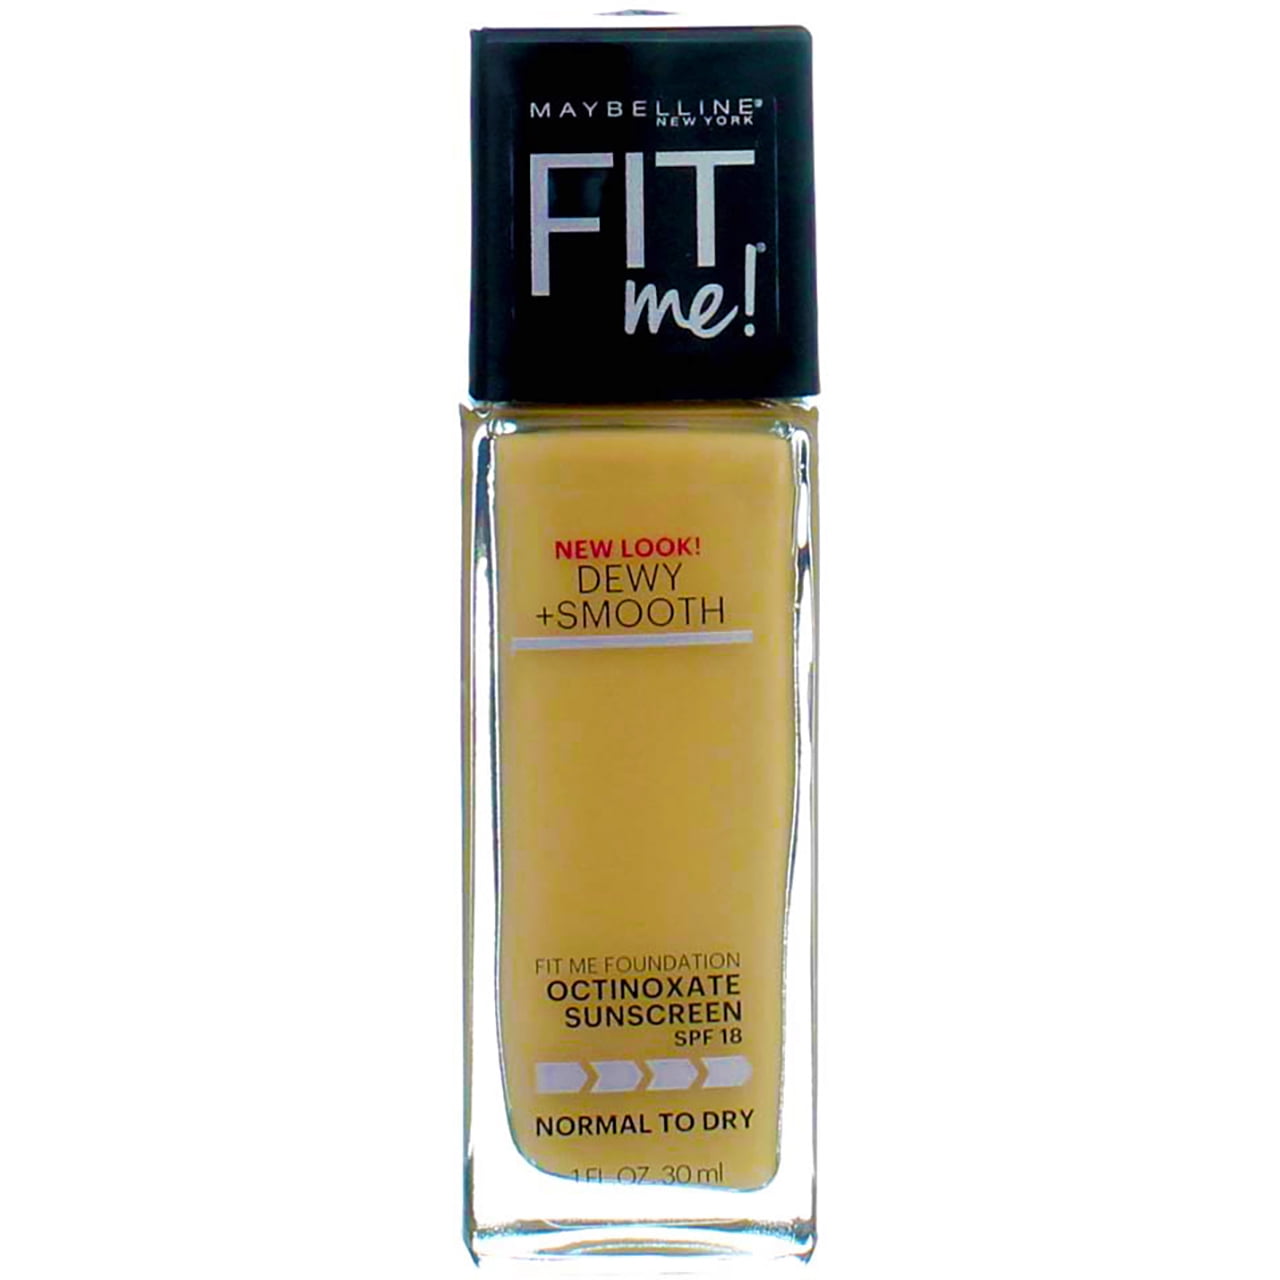  Maybelline Fit Me Dewy + Smooth Liquid Foundation Makeup,  Ivory, 1 Count (Packaging May Vary) : Foundation Makeup : Beauty & Personal  Care